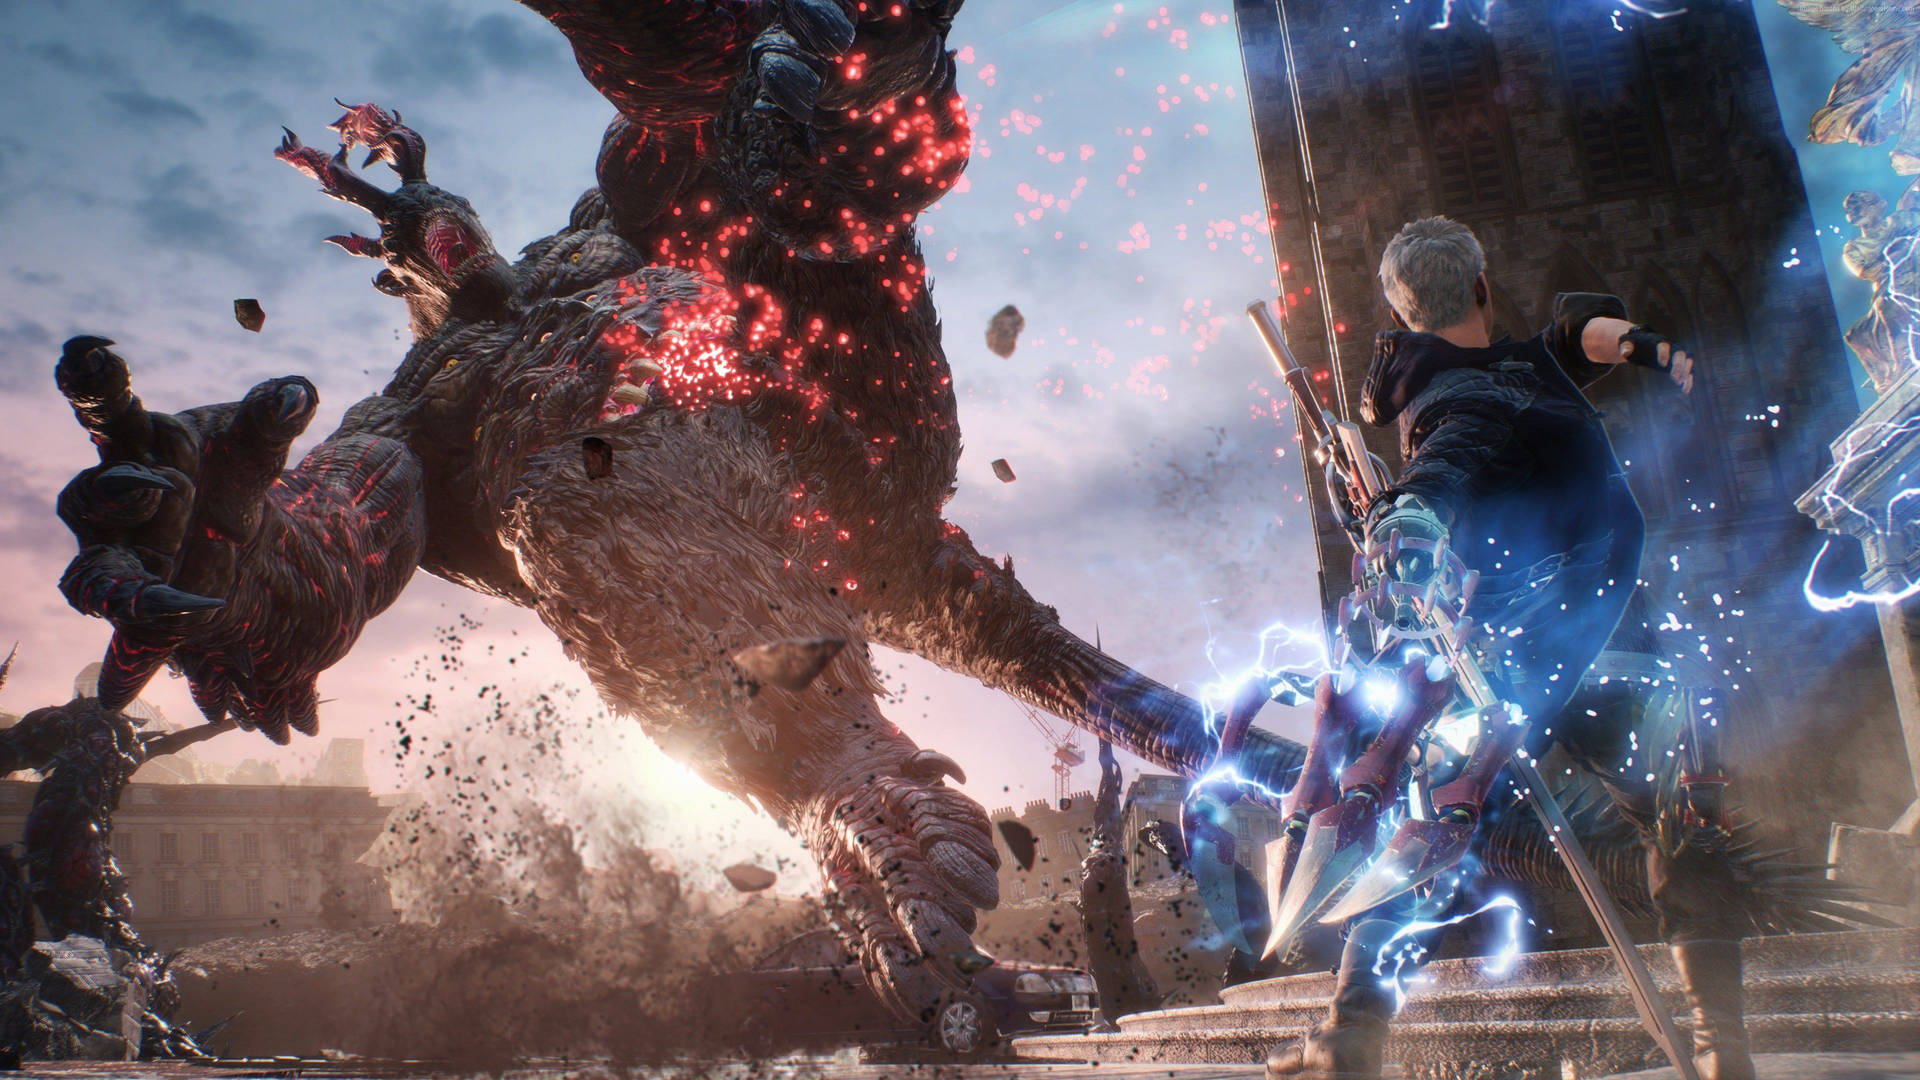 A powerful warrior slays demons in Devil May Cry 5 Wallpaper